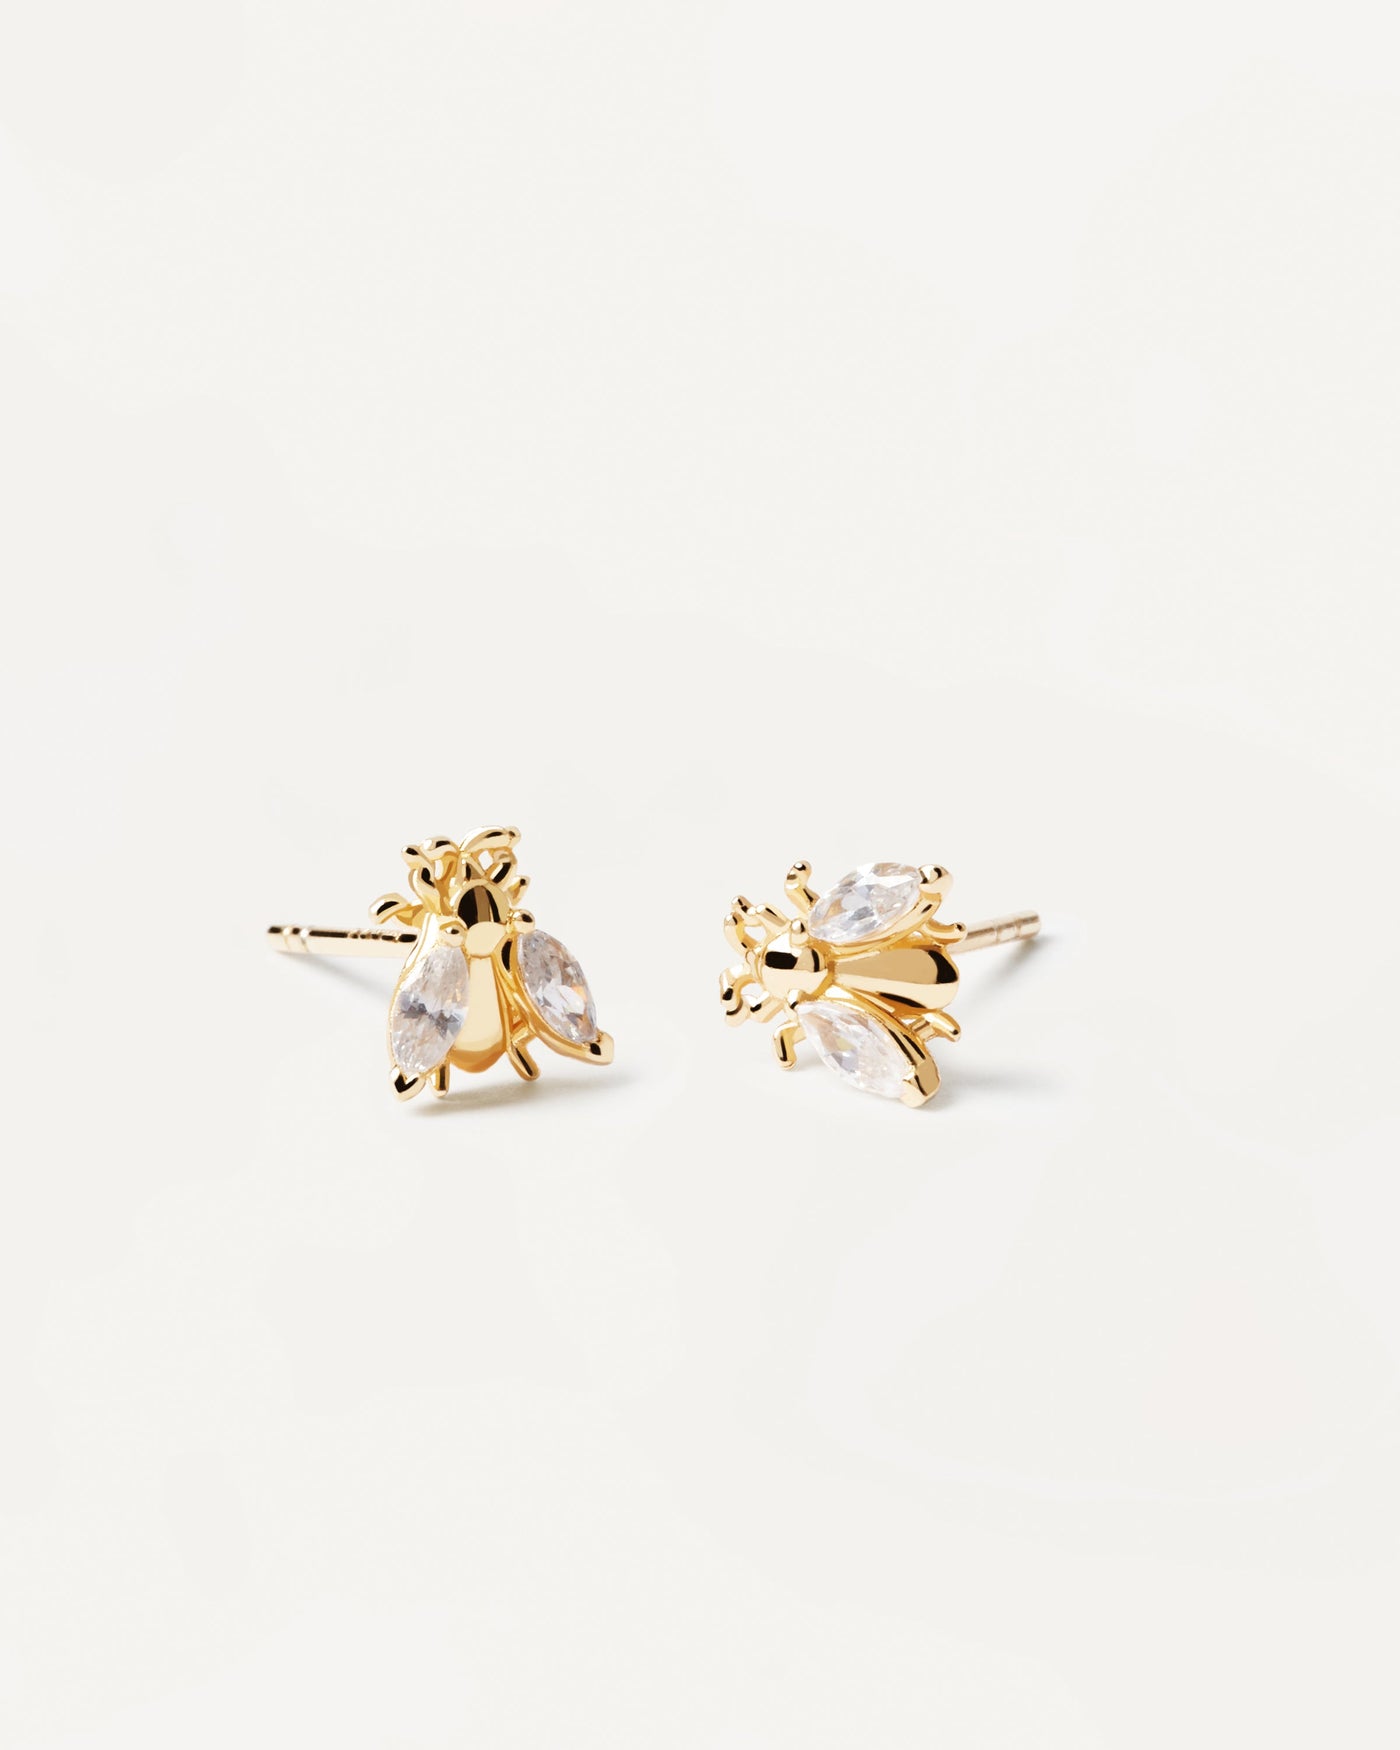 2022 Selection | Buzz Gold Earrings. Get the latest arrival from PDPAOLA. Place your order safely and get this Best Seller. Free Shipping over 40€